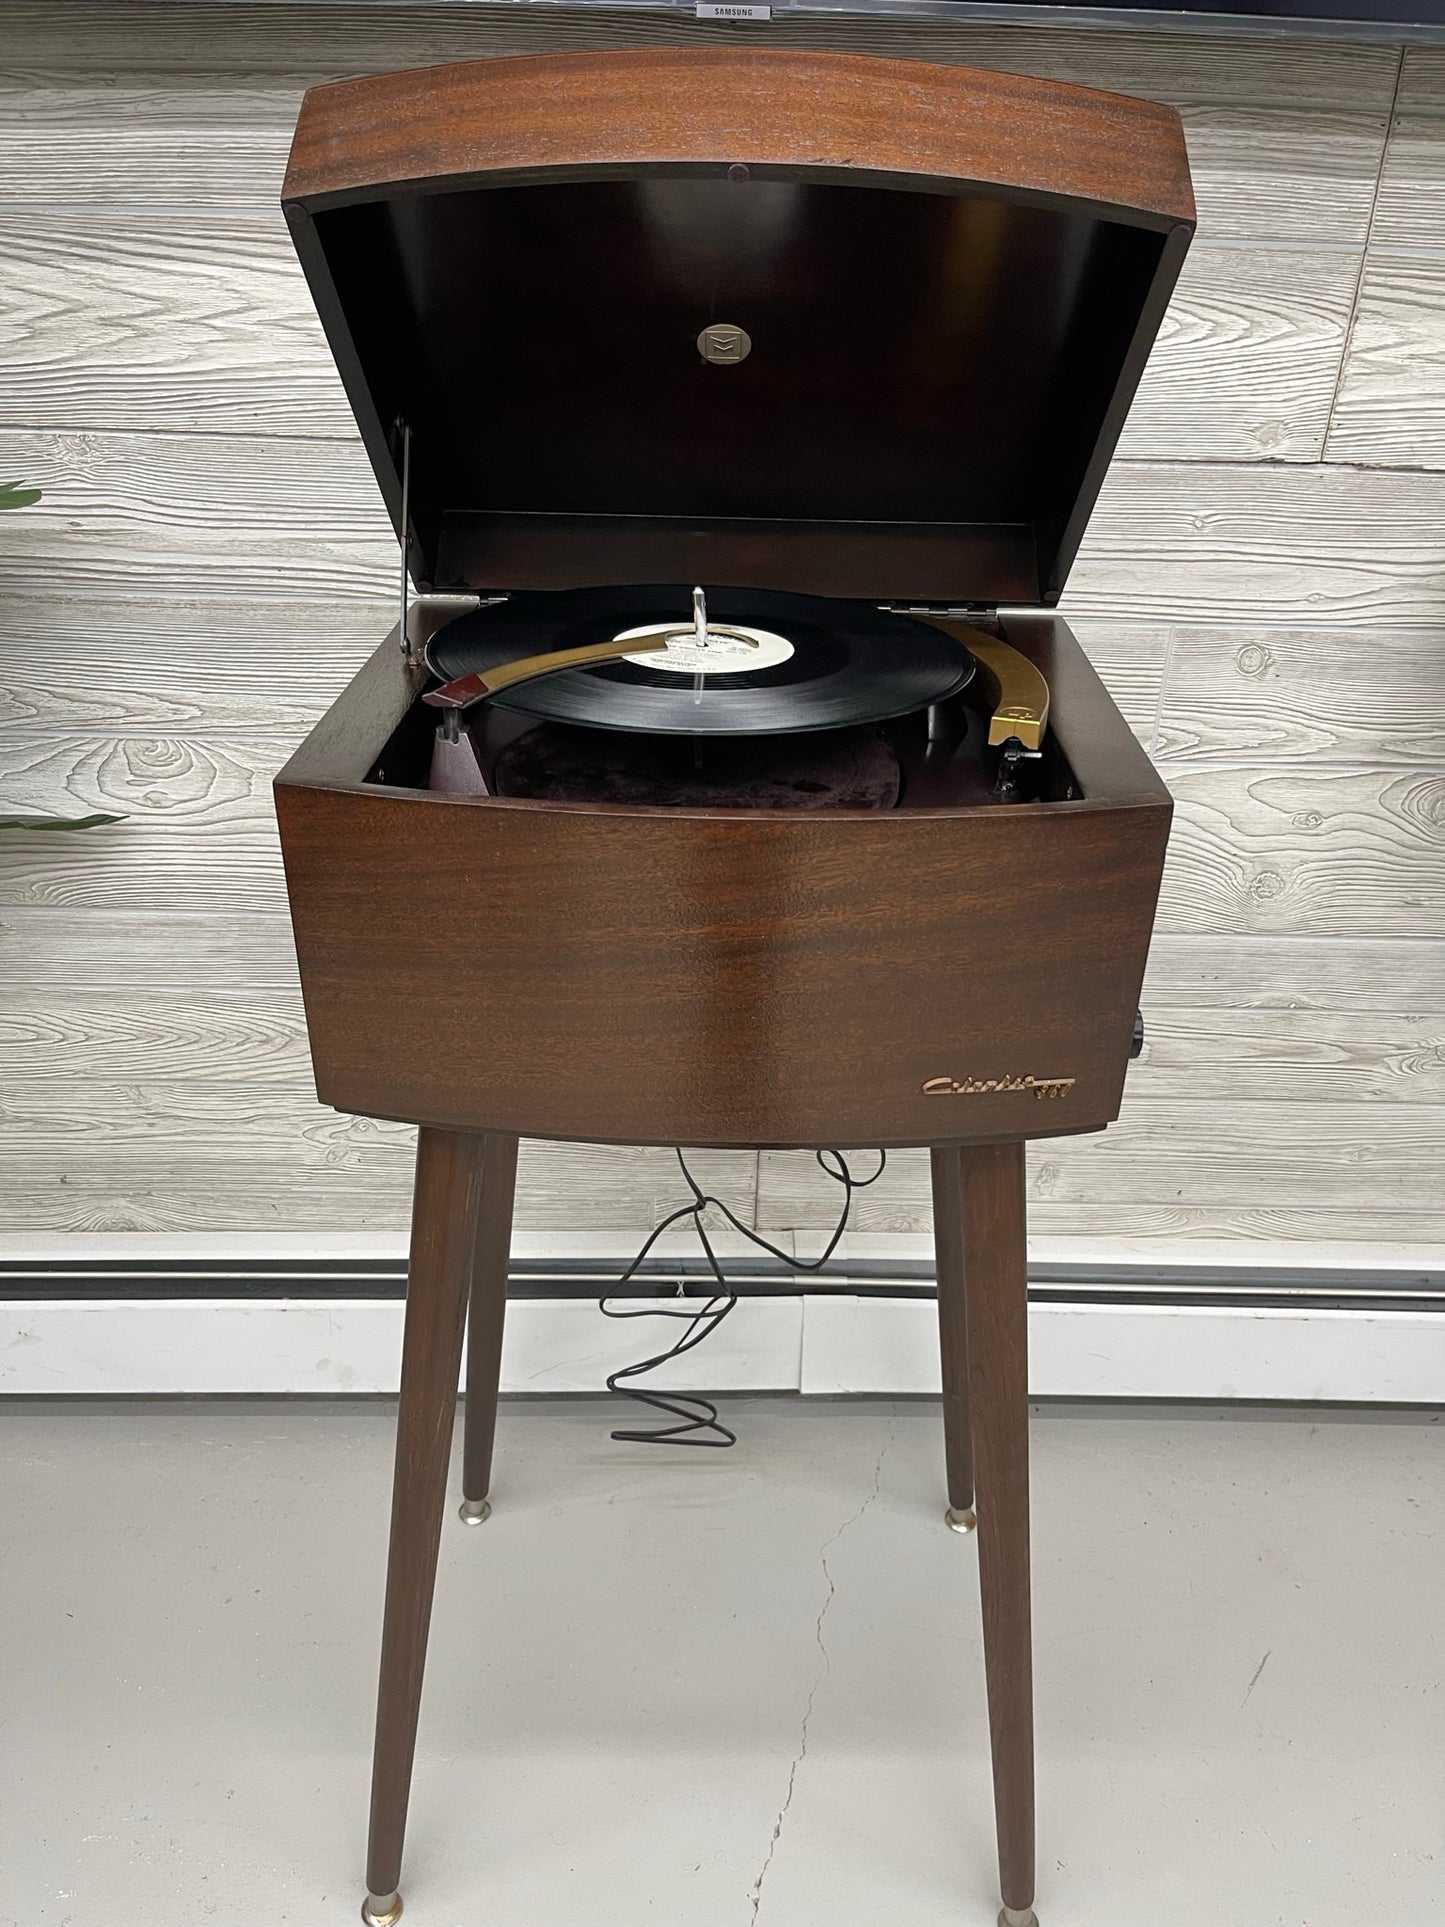 SOLD OUT!!! COLUMBIA 360 Mid Century Vintage Record Player Changer The Vintedge Co.